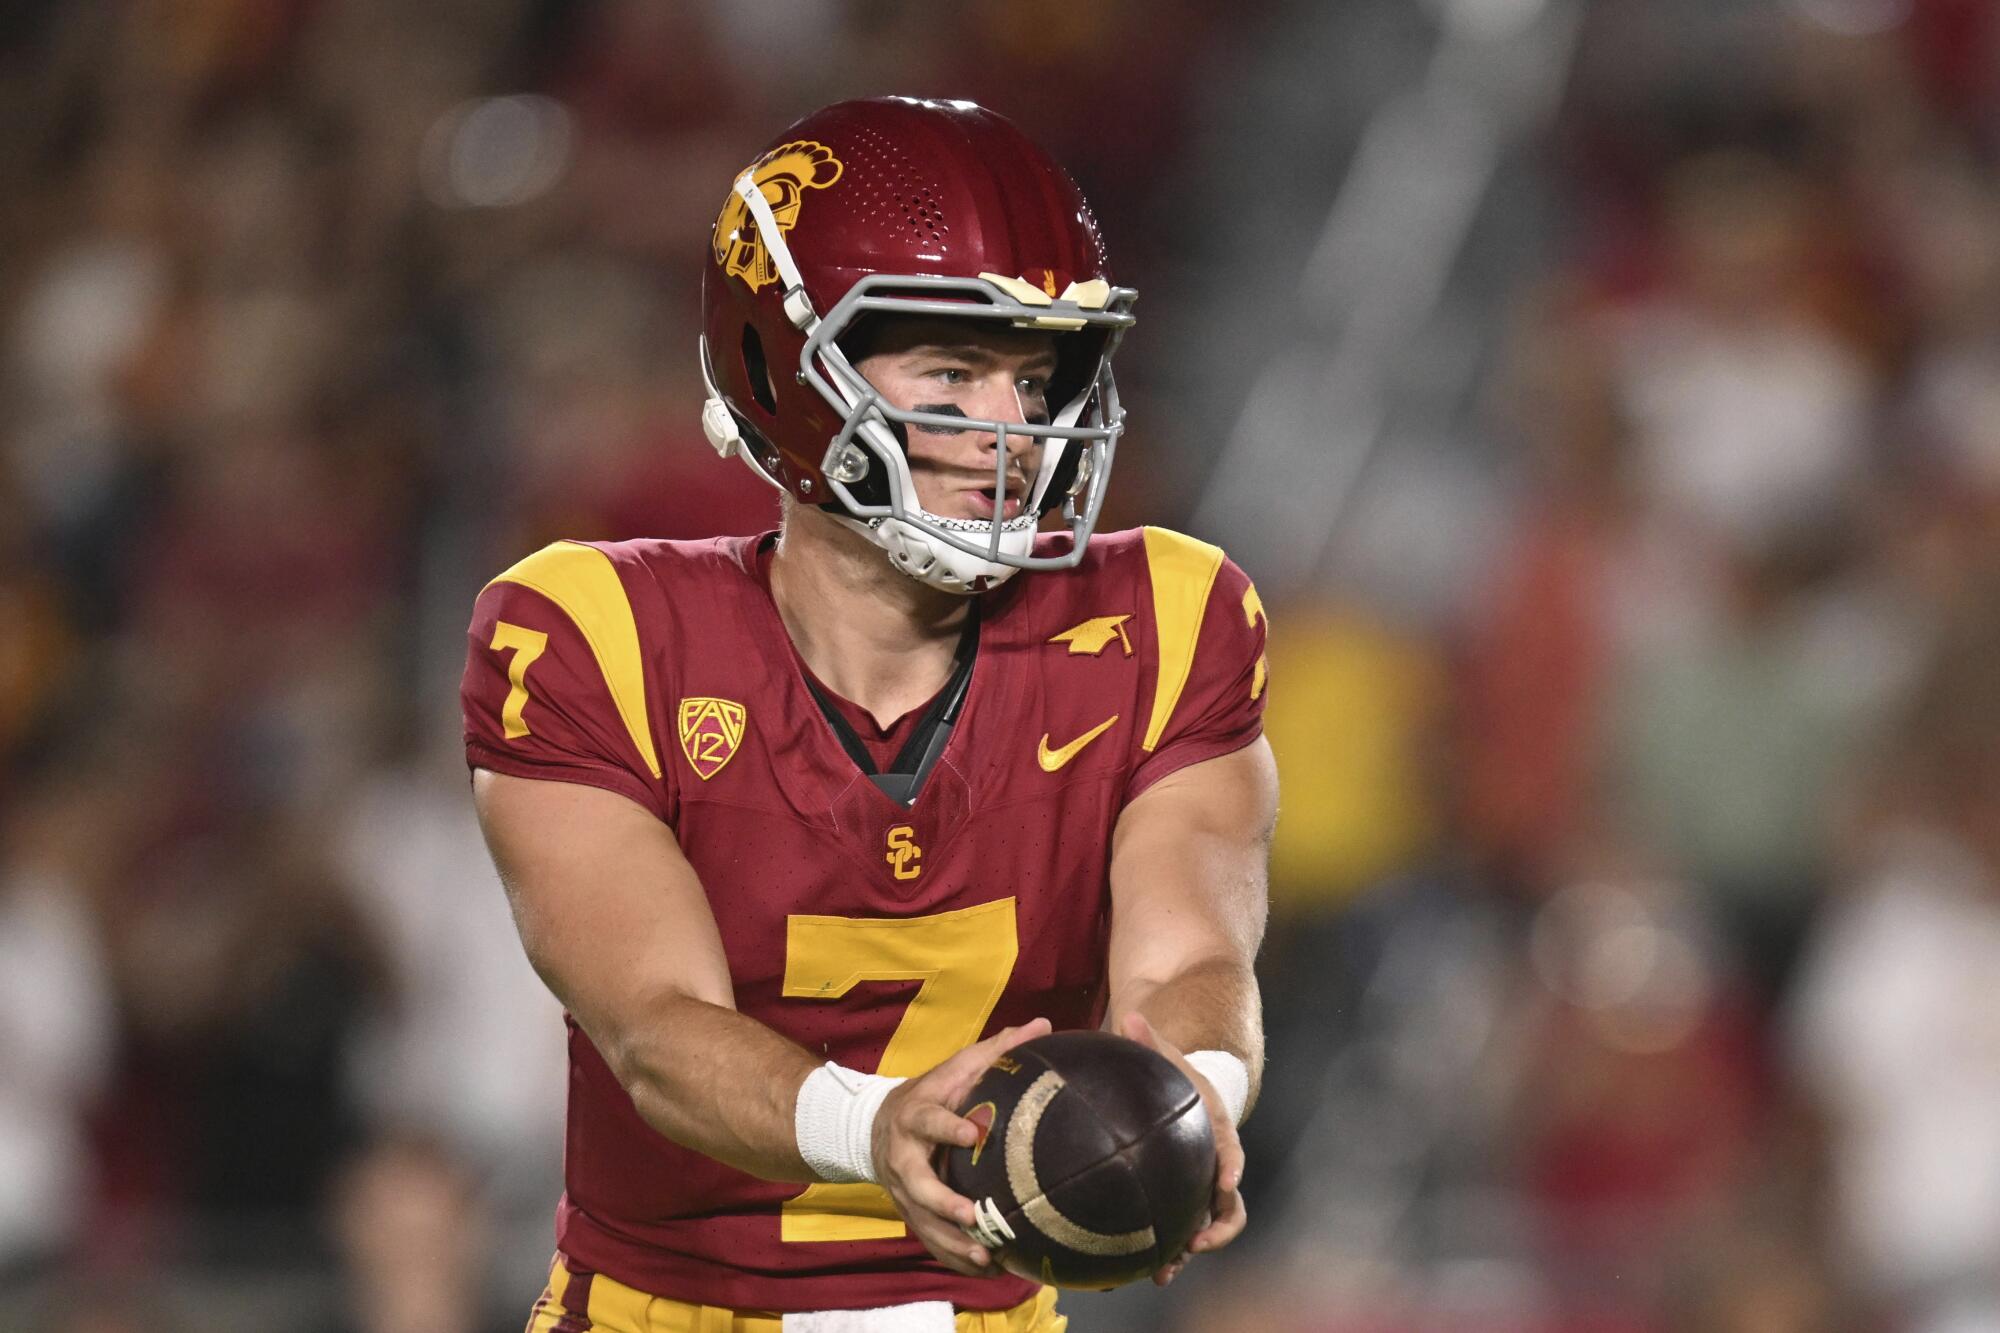 USC quarterback Miller Moss hands off the ball during a game against San José State 